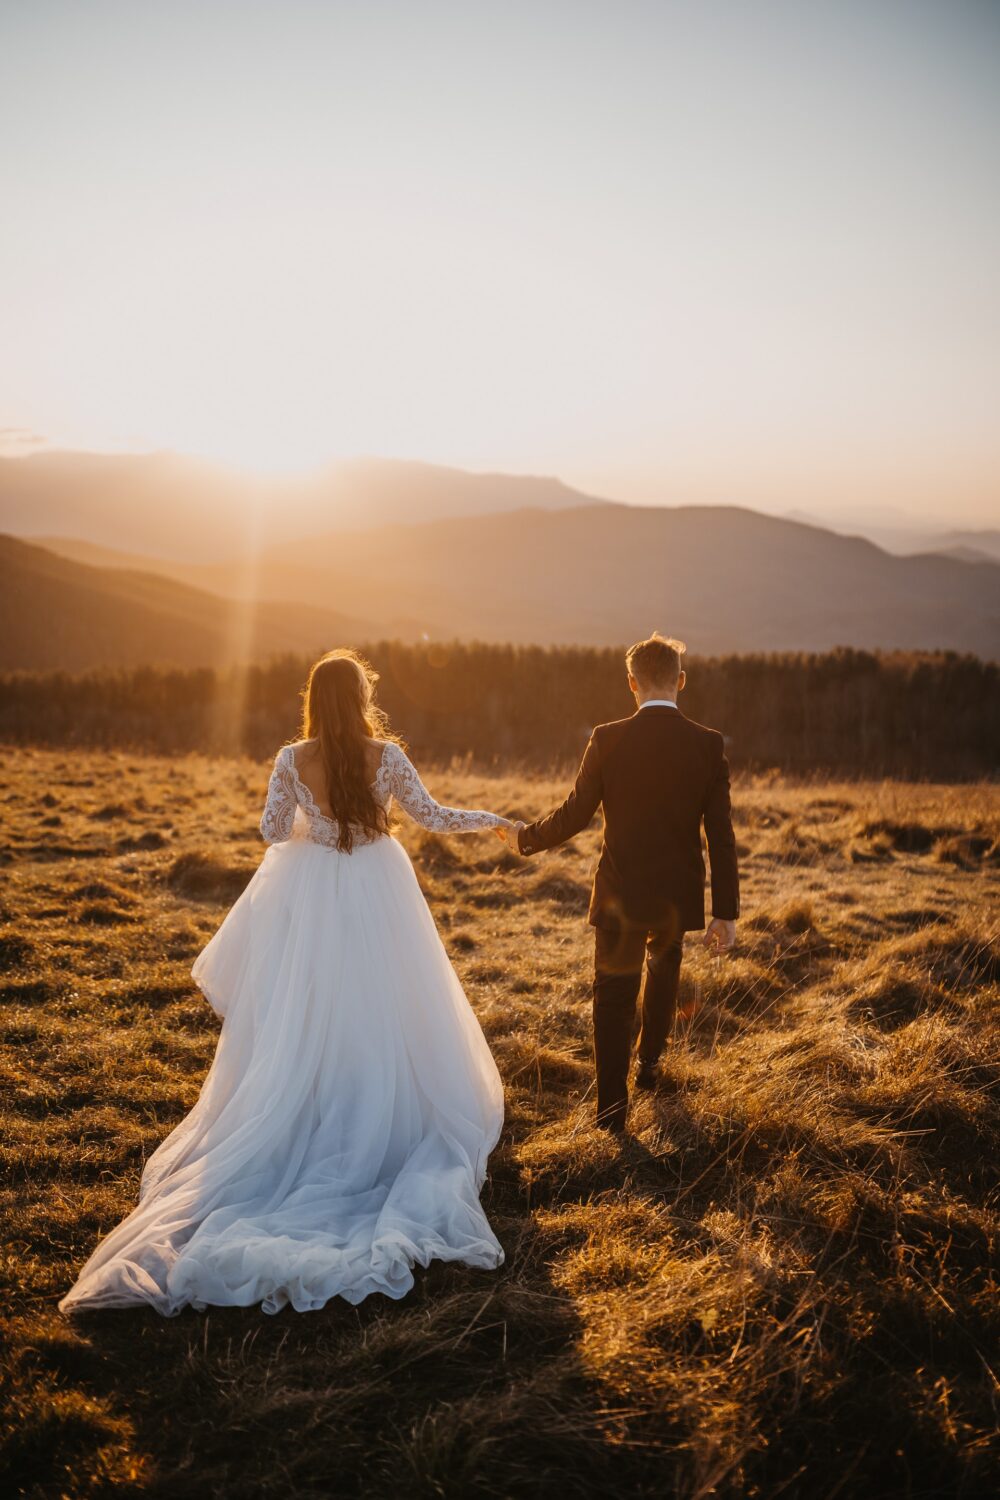 A couple walking over a field in wedding attire, with the sun rising in the distance.